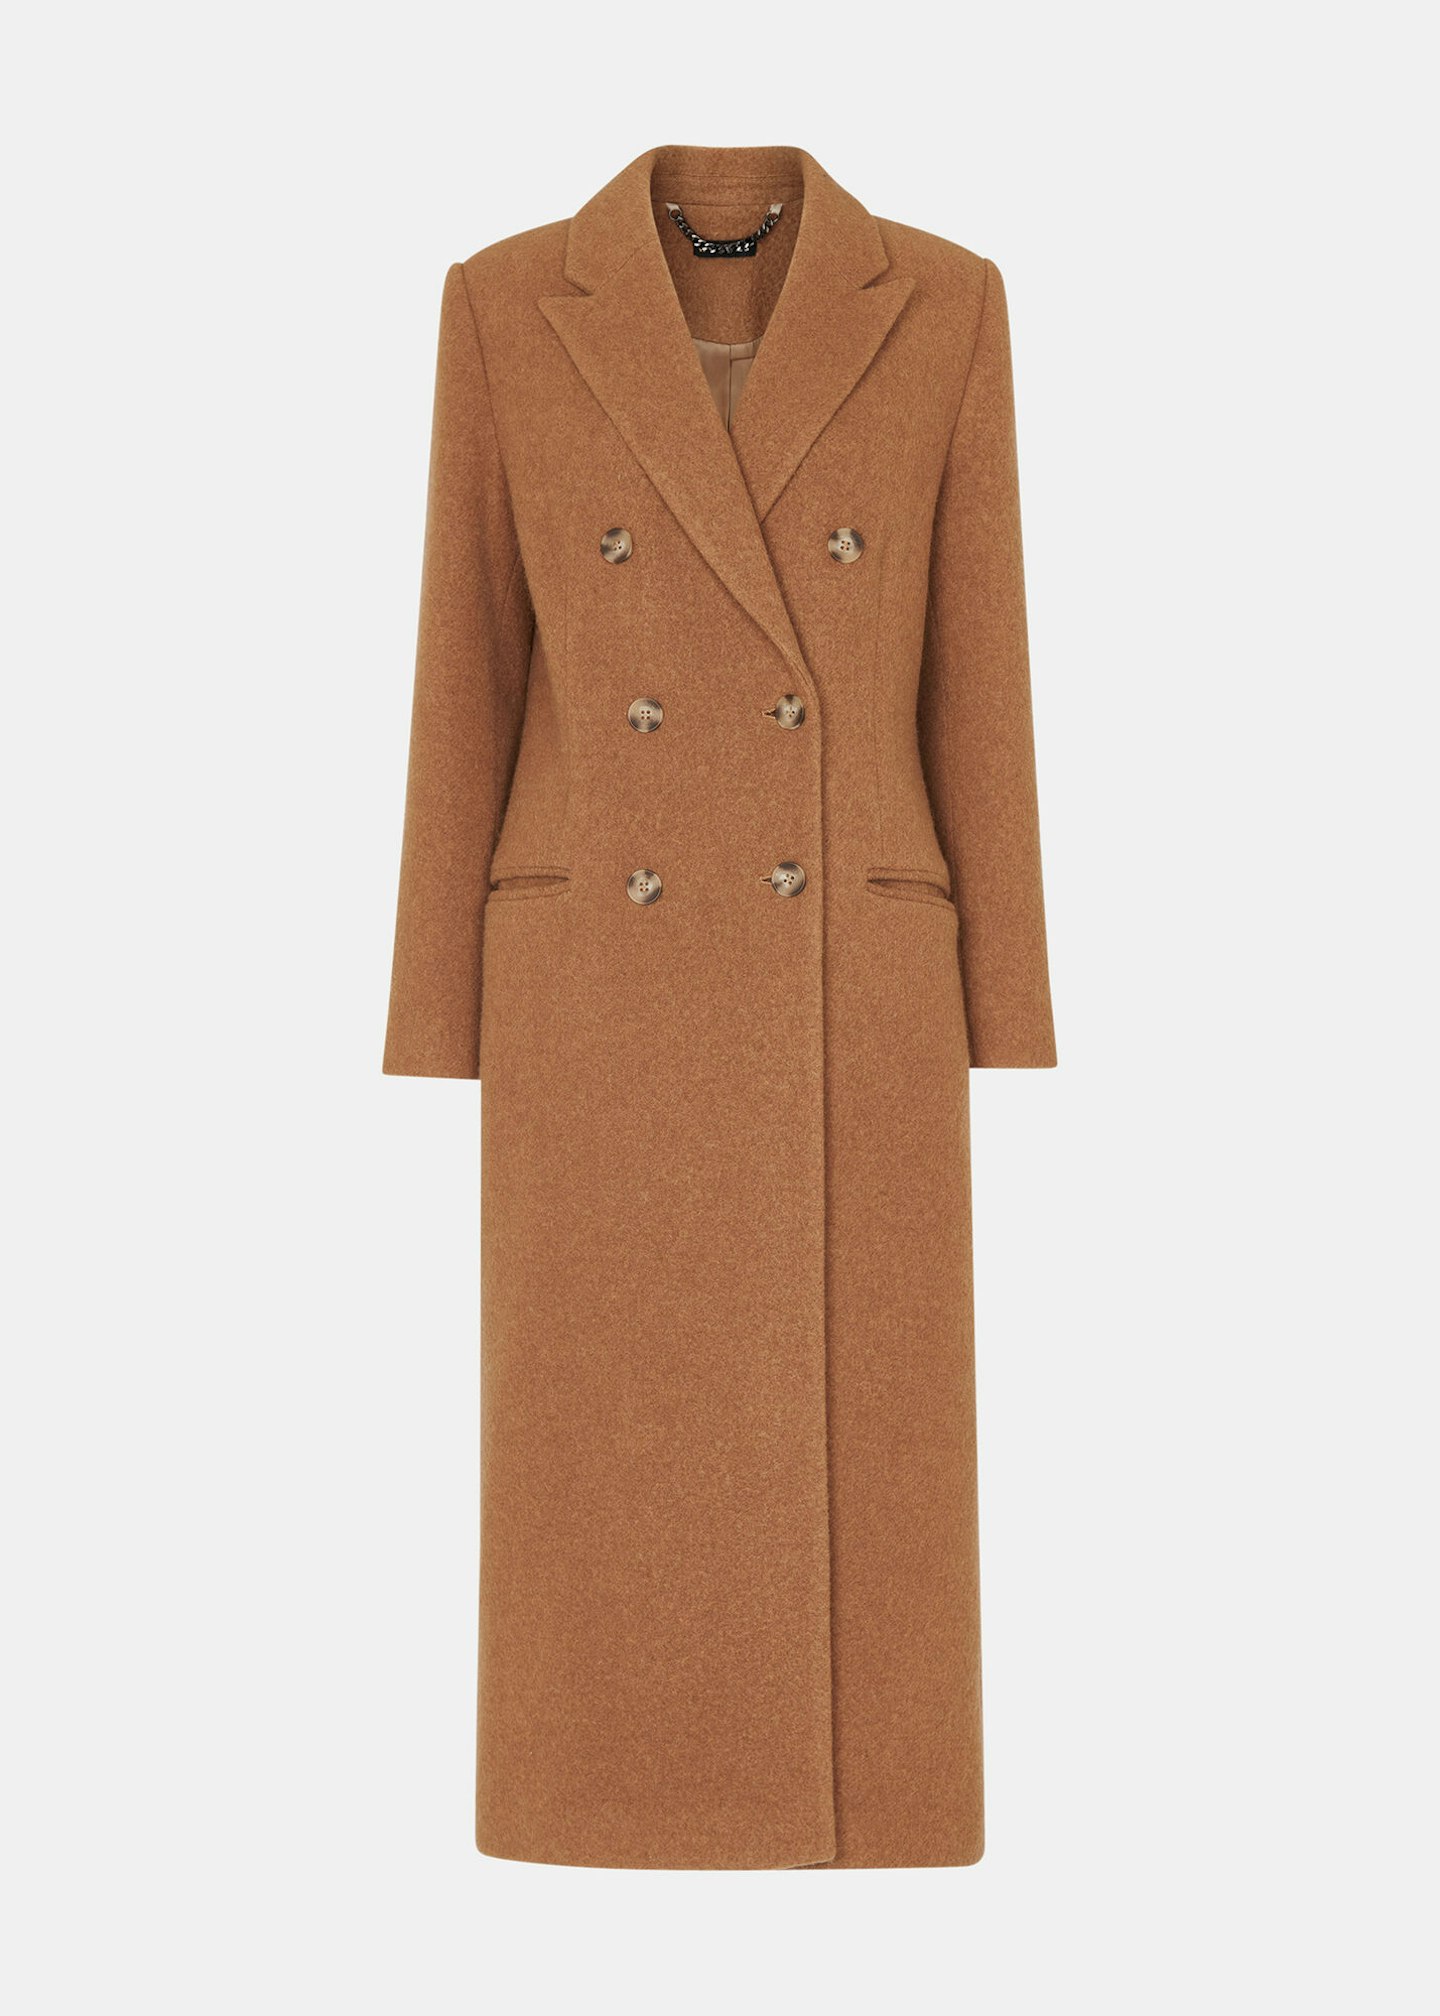 Whistles, Textured Wool-Blend Coat